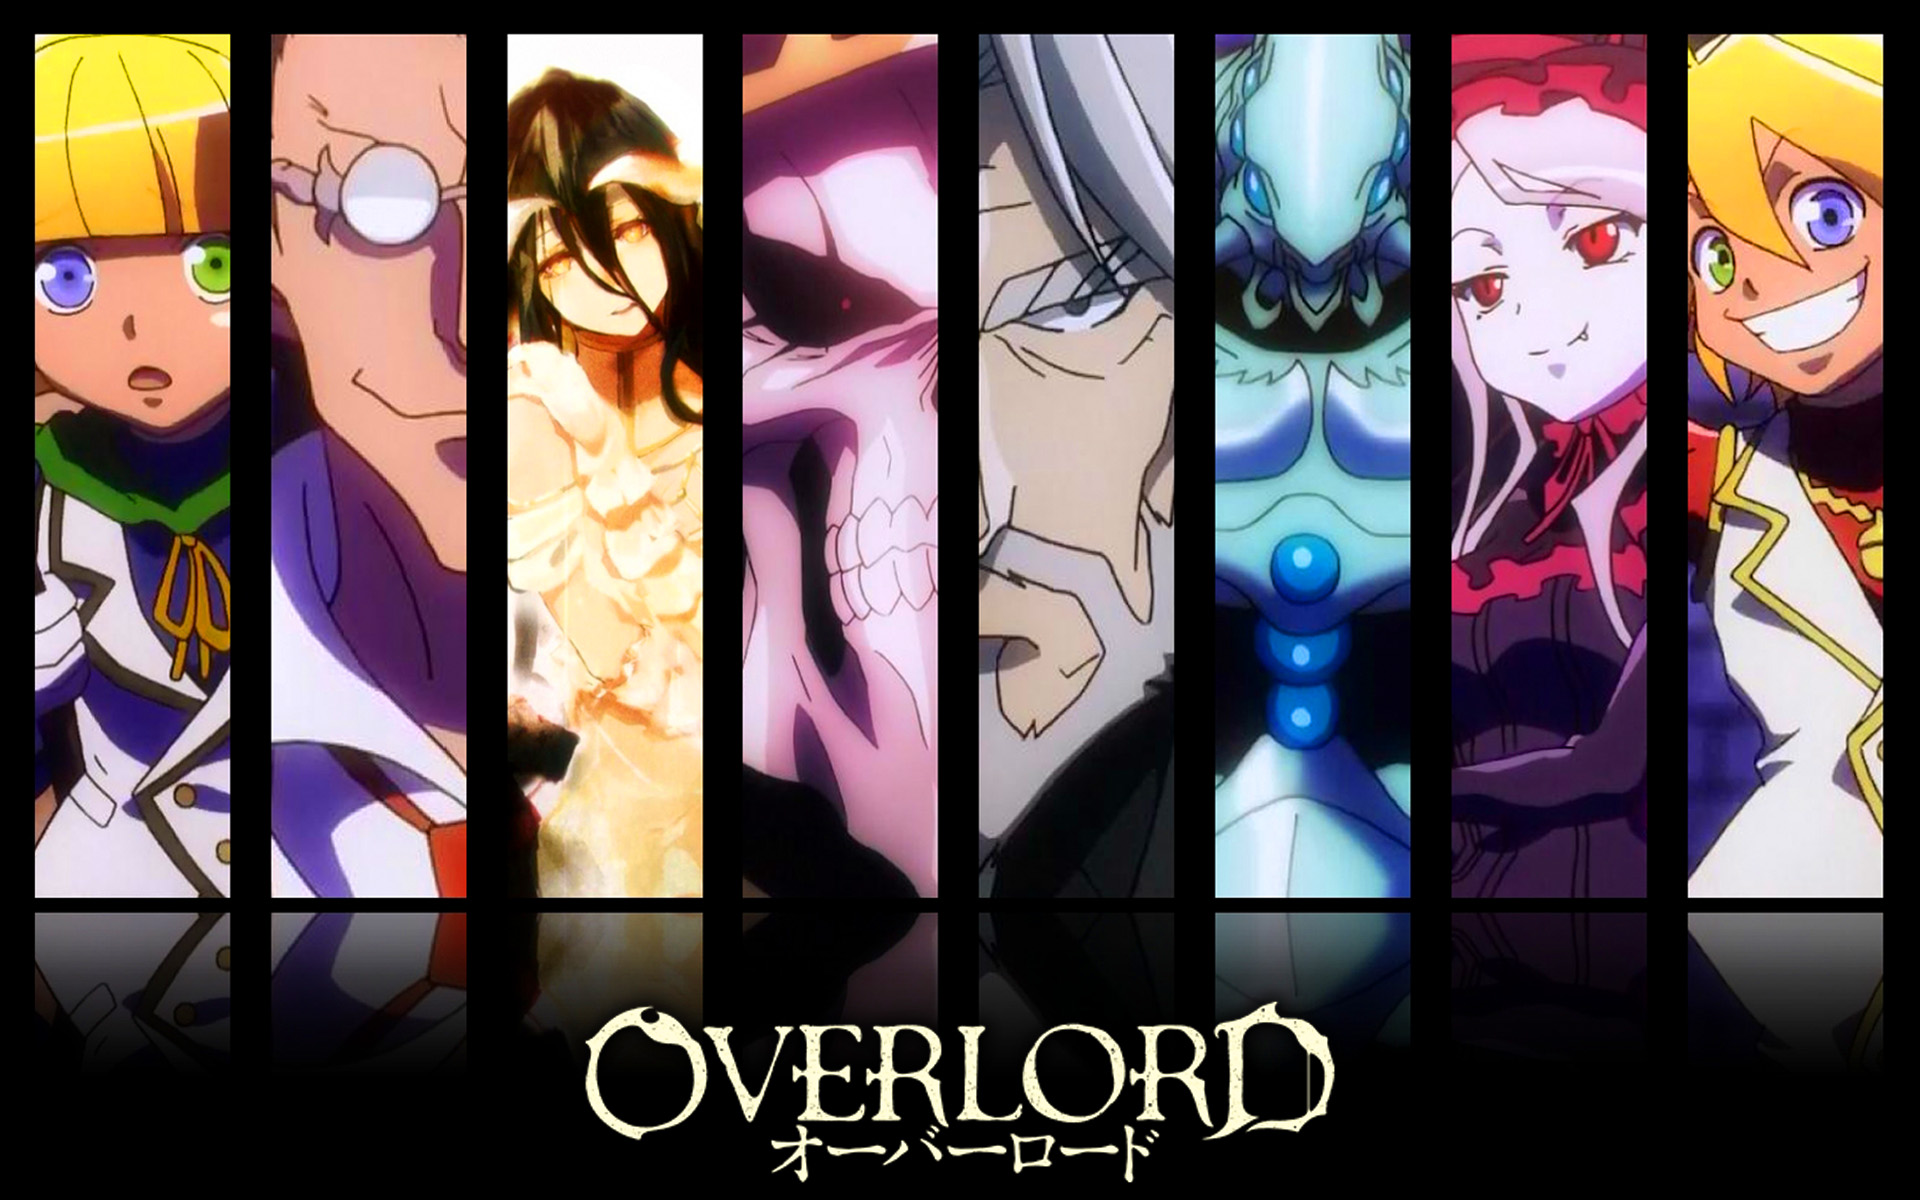 Overlord аниме